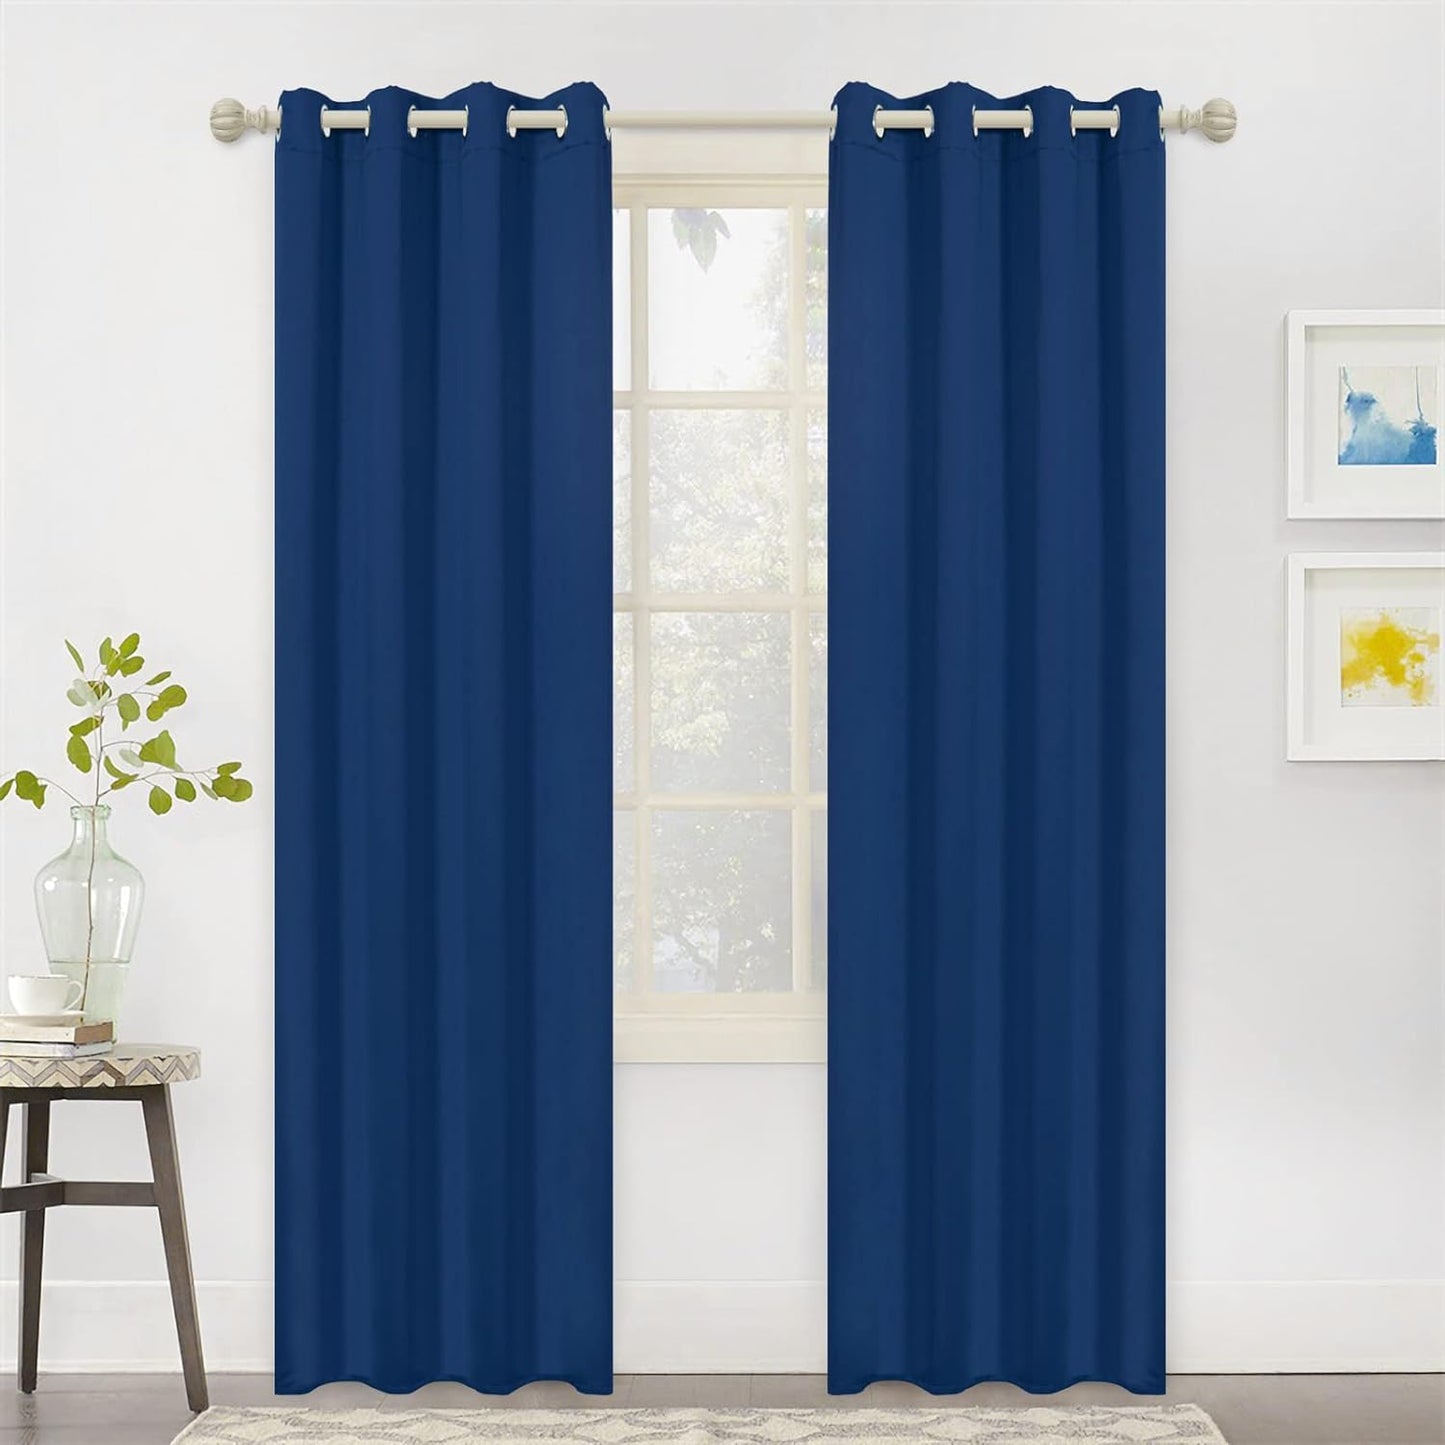 MYSKY HOME Black Curtains for Bedroom 90 Inch Long Blackout Curtains for Living Room 2 Panels Thermal Insulated Grommet Room Darkening Curtains Privacy Protect Window Drapes, 52 X 90 Inches, Black  MYSKY HOME Navy Blue 52W X 84L 